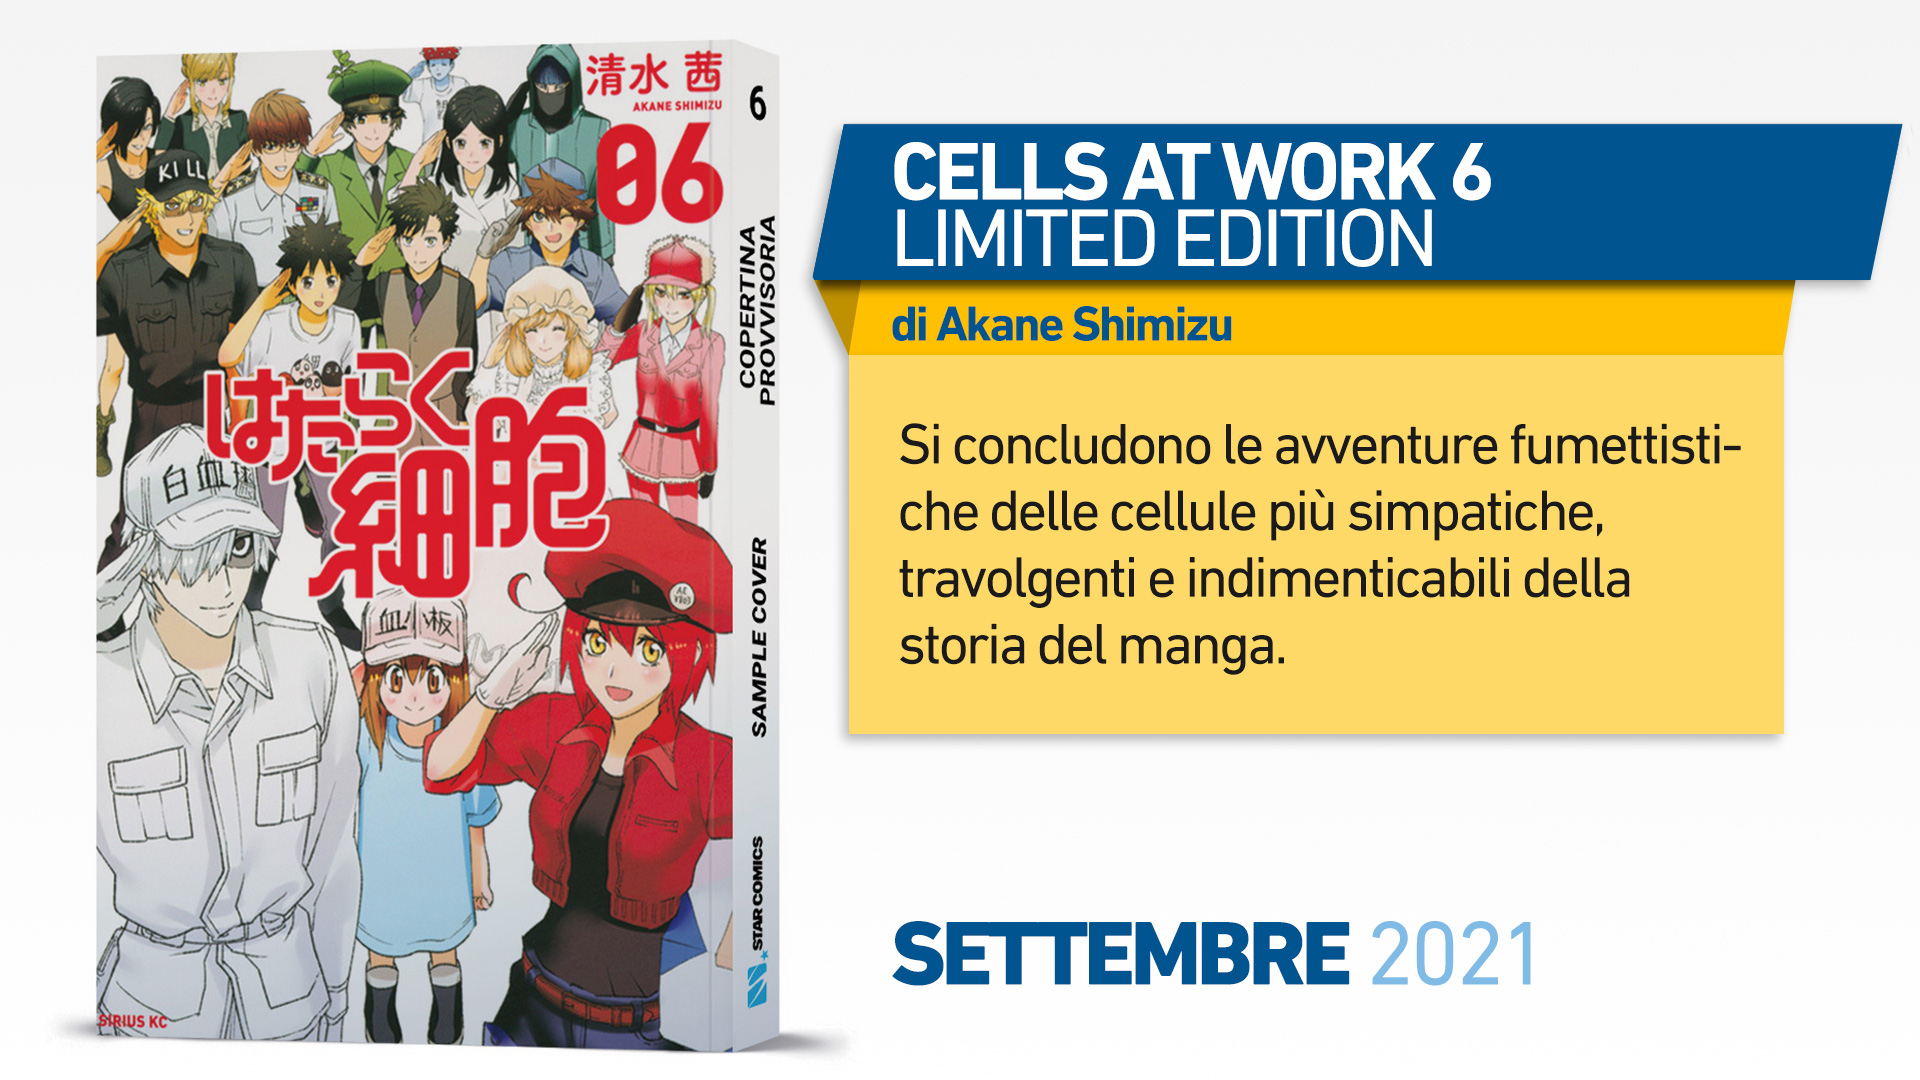 CELLS AT WORK 6 LIMITED EDITION